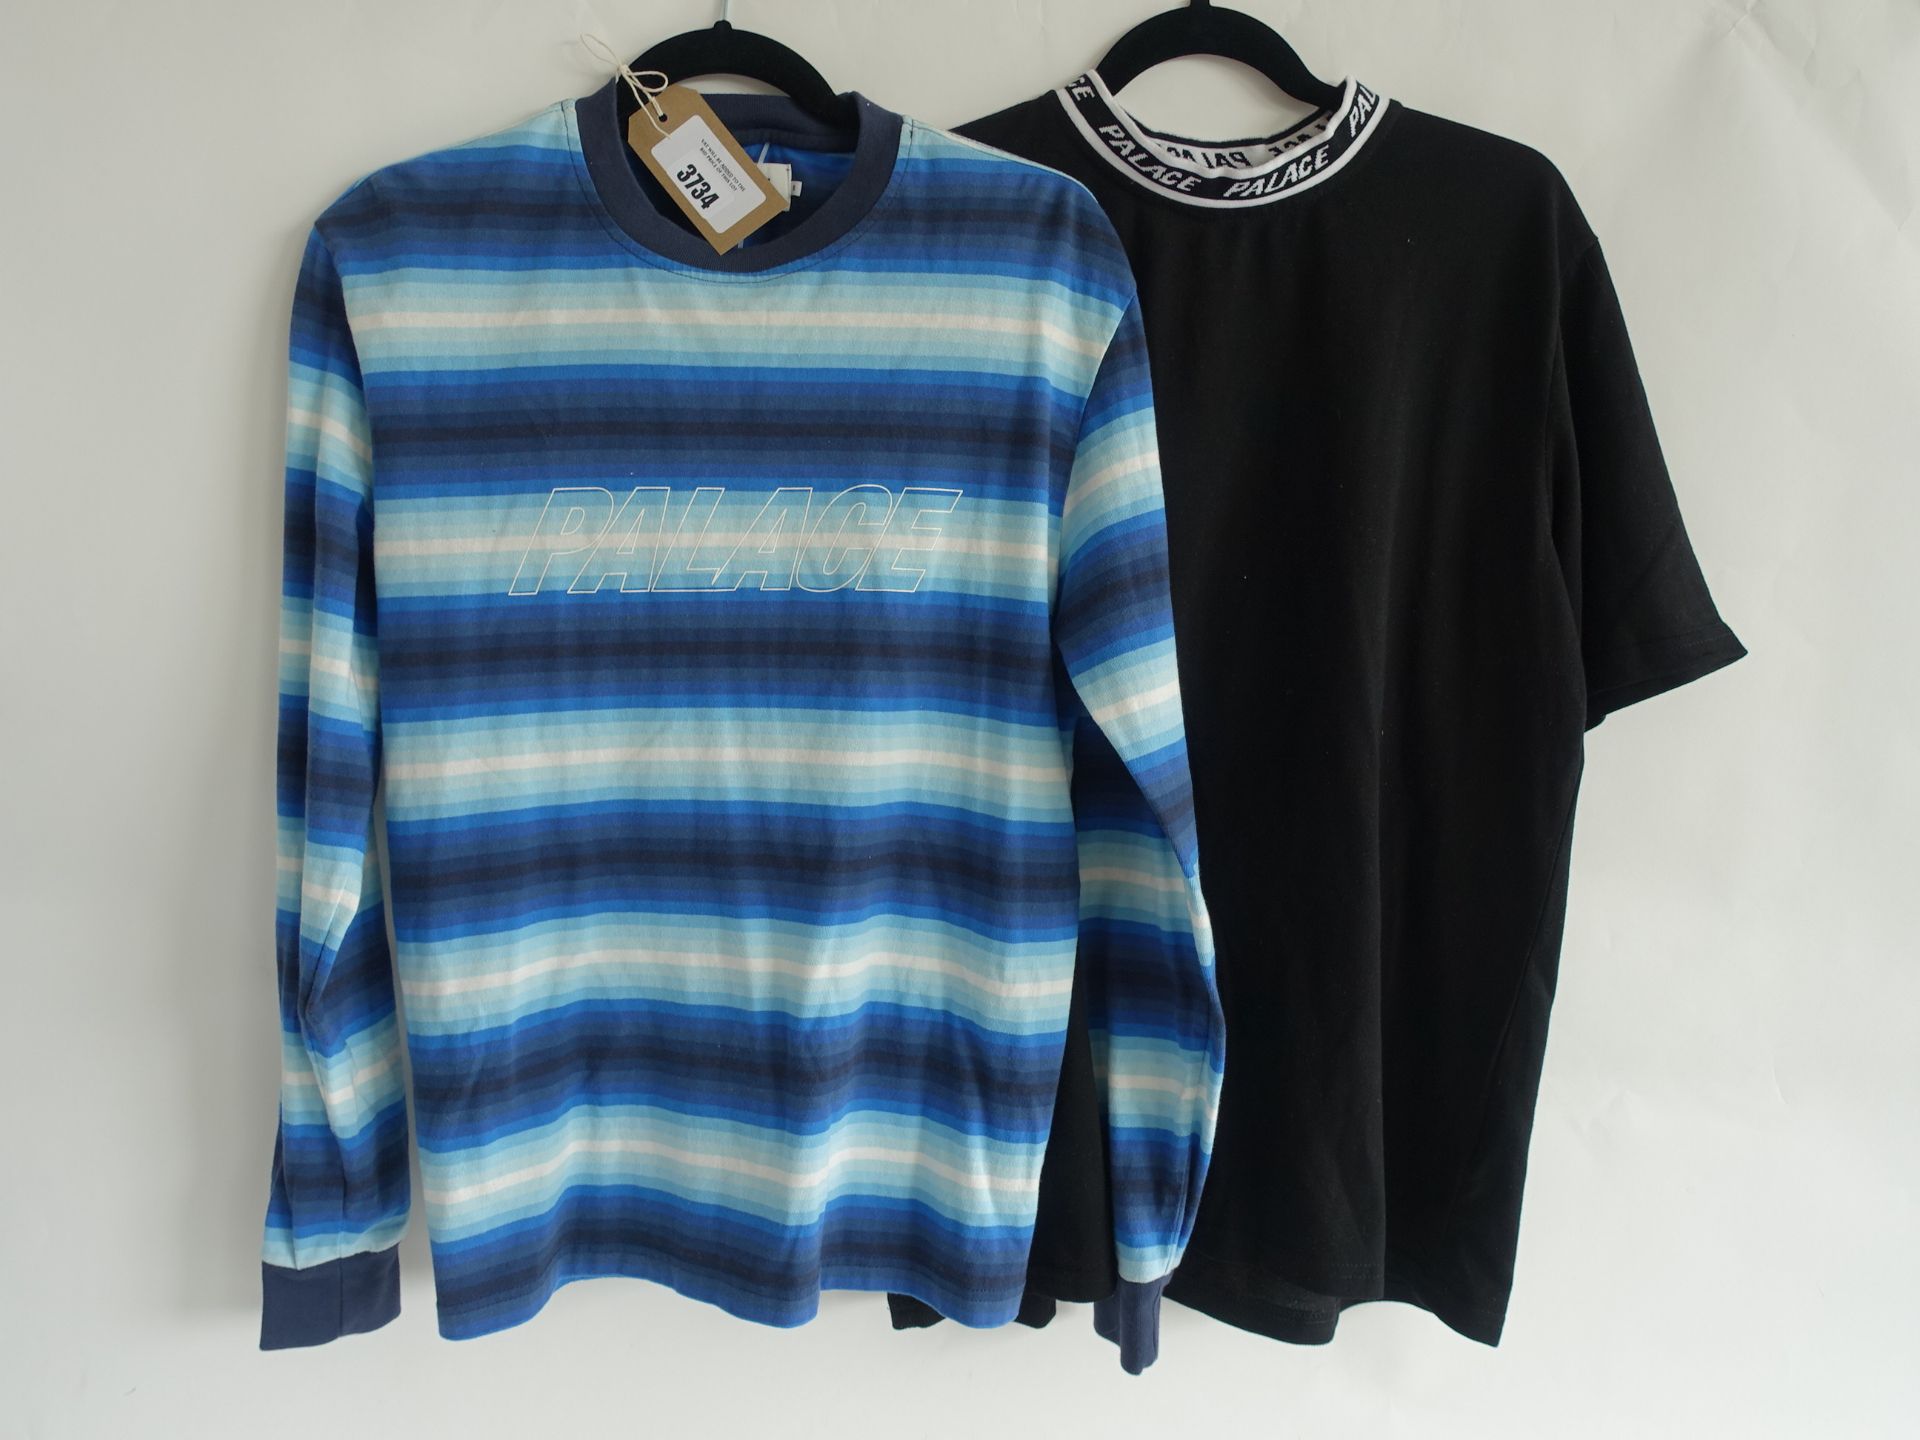 Palace blue Fader stripe t-shirt size small (used) and Palace black logo collar t-shirt size